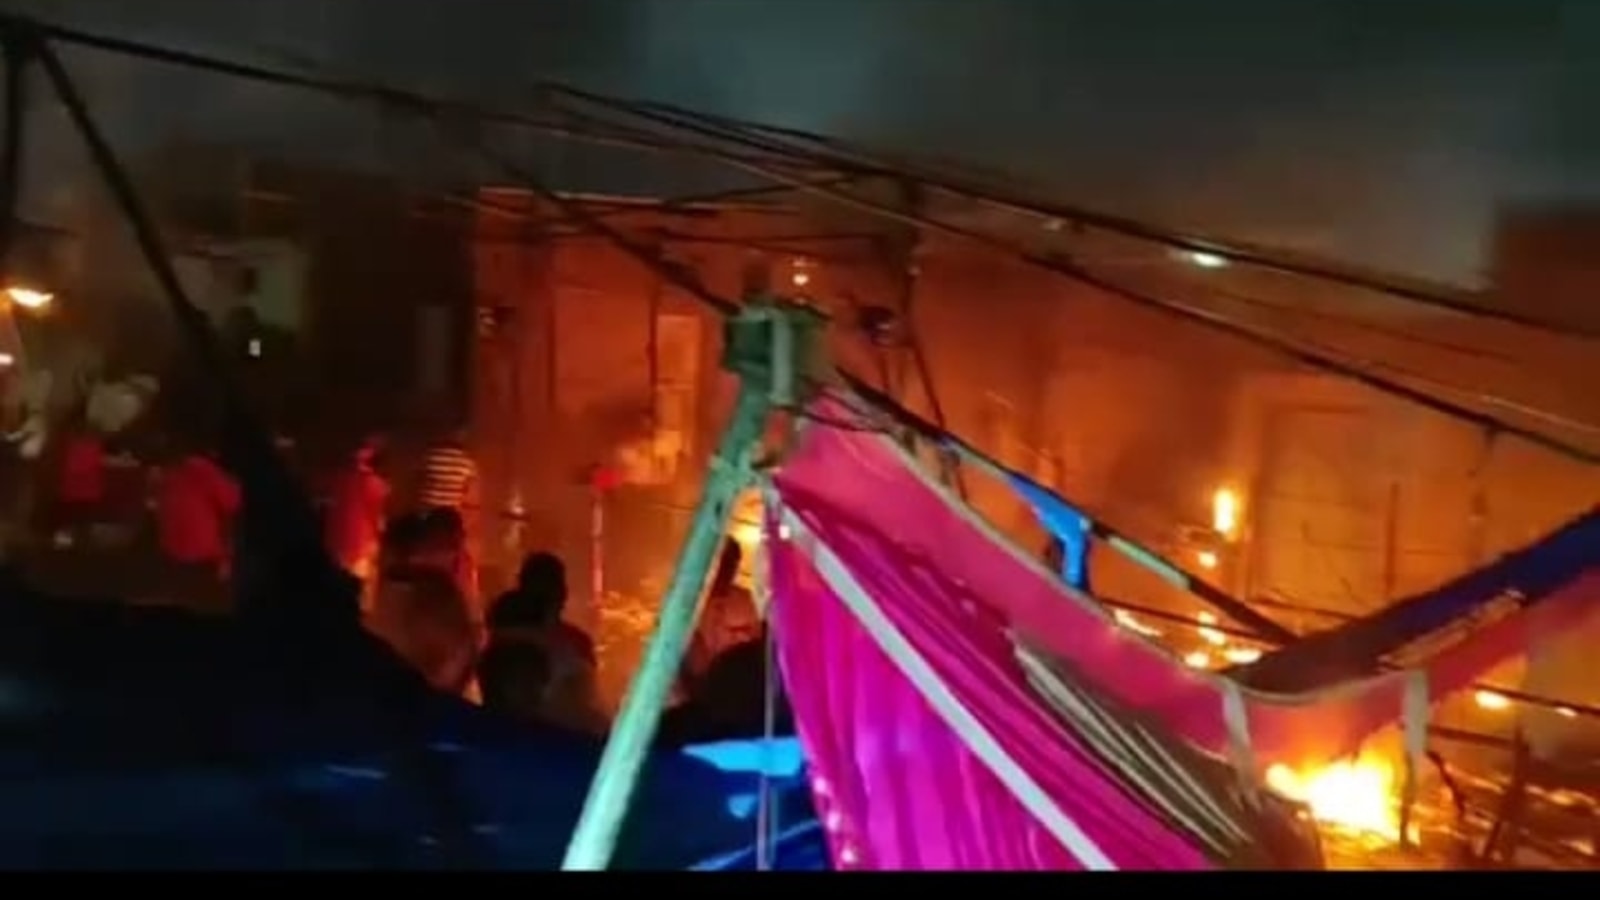 UP: Boy killed in Durga Puja pandal fire in Bhadohi, 22 critical | Latest  News India - Hindustan Times